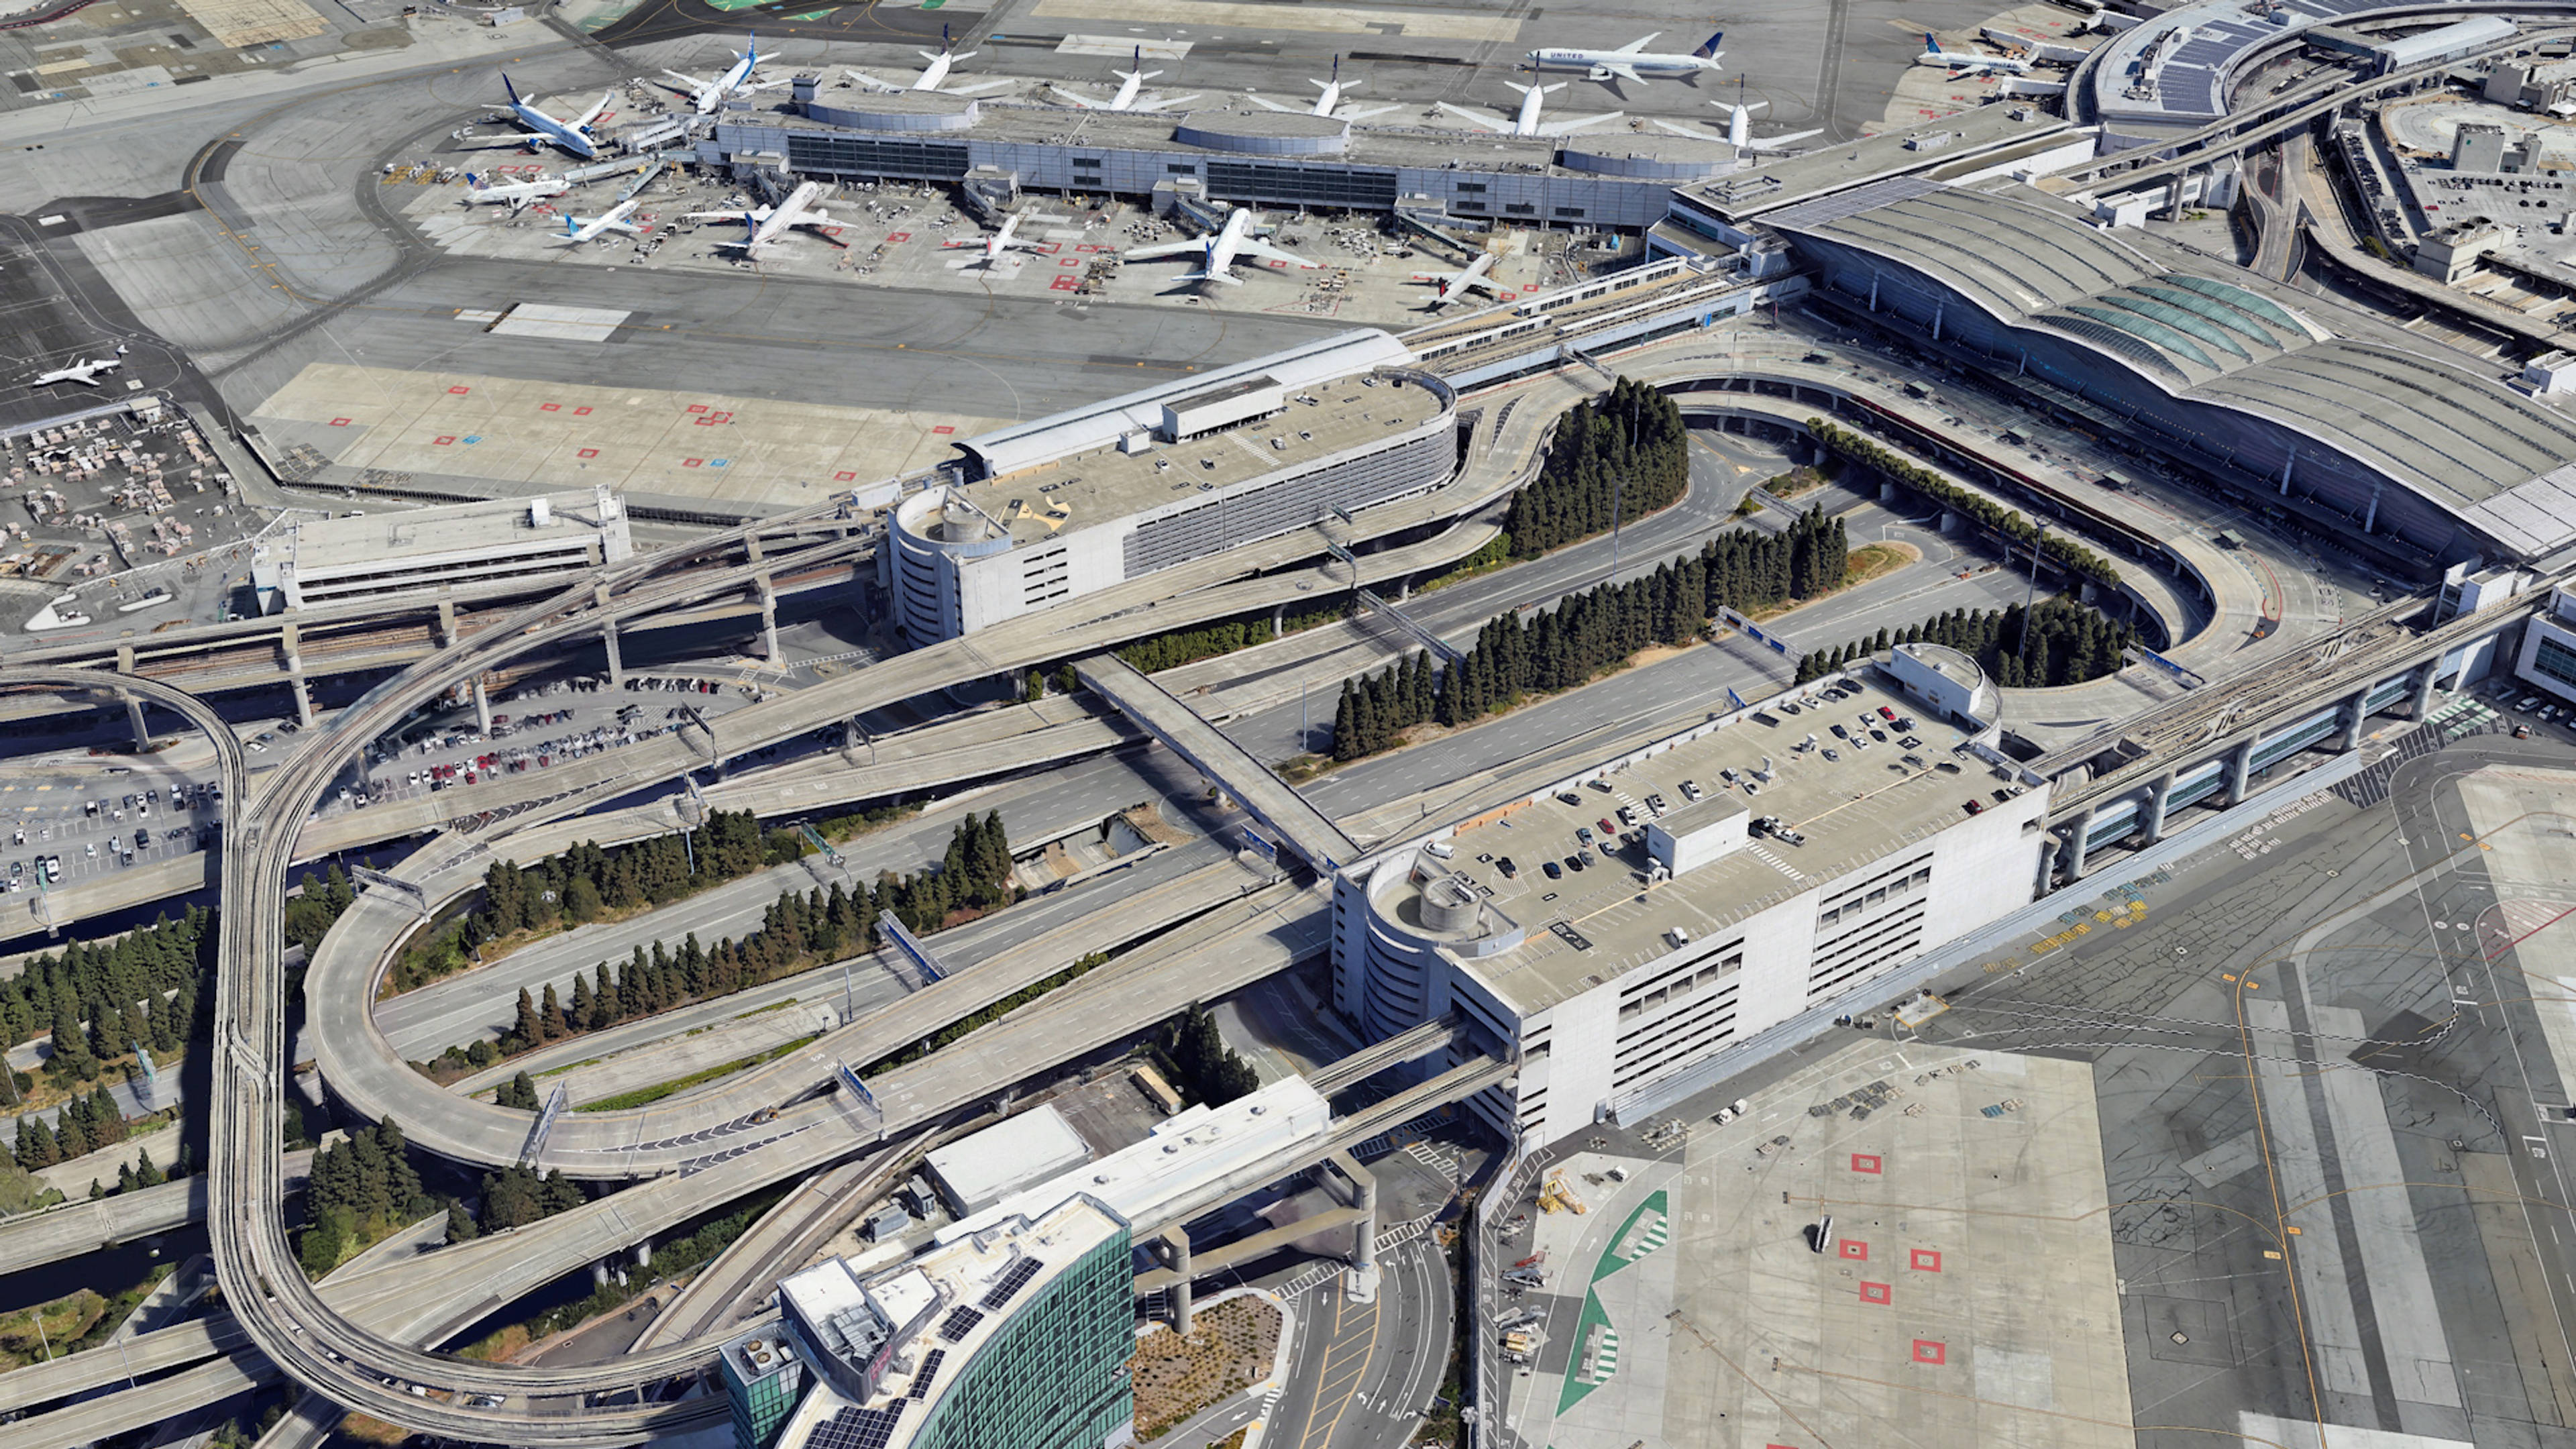  Aerial View of San Francisco Airport Parking